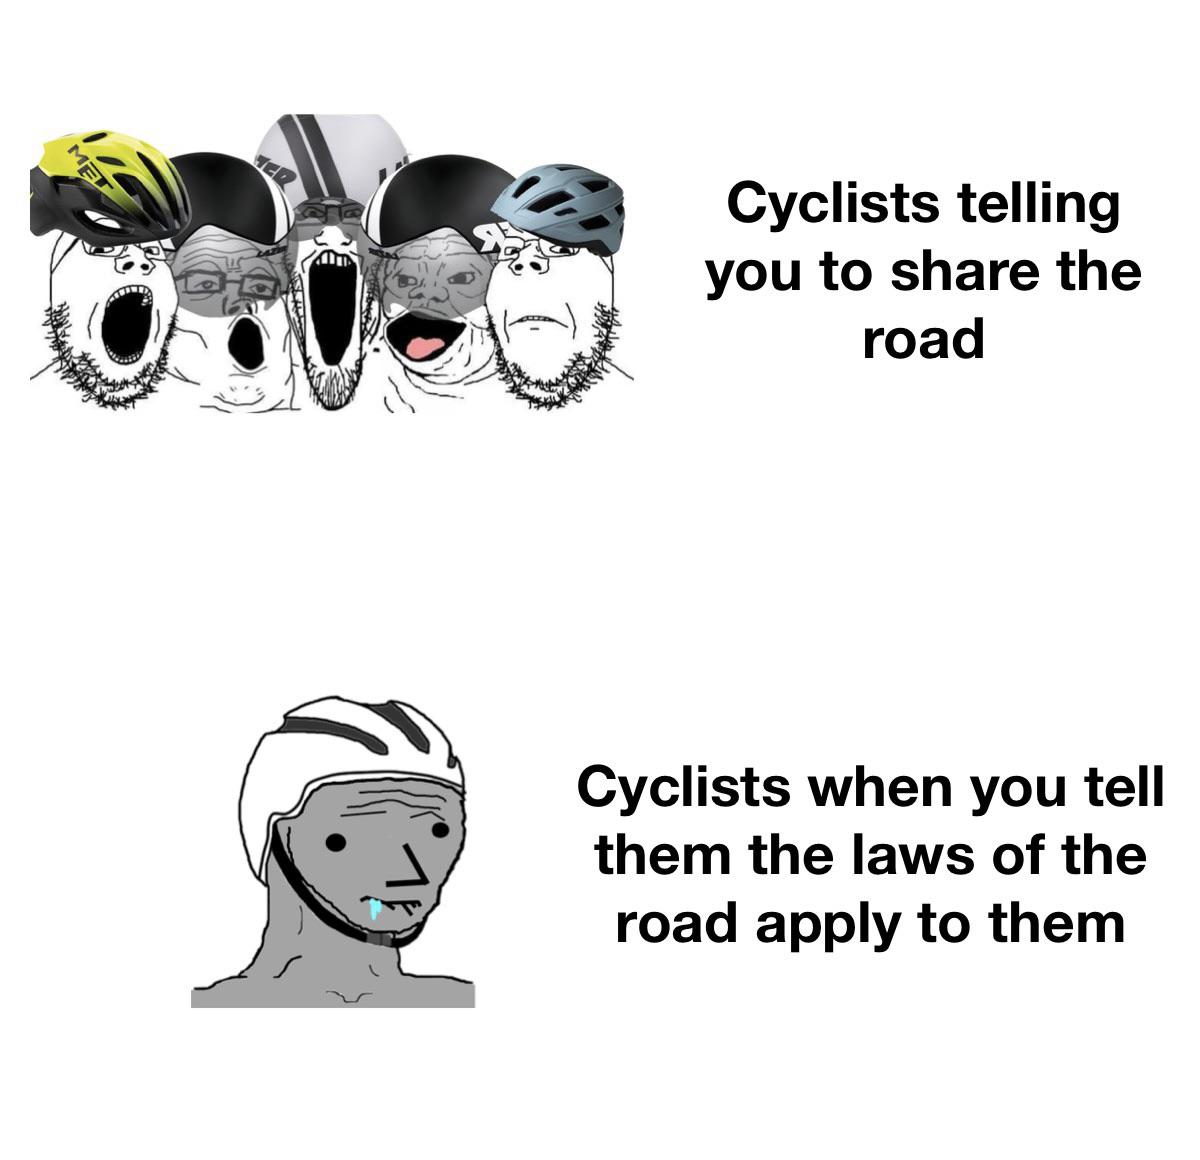 funny memes - cartoon - Cyclists telling you to the road Cyclists when you tell them the laws of the road apply to them